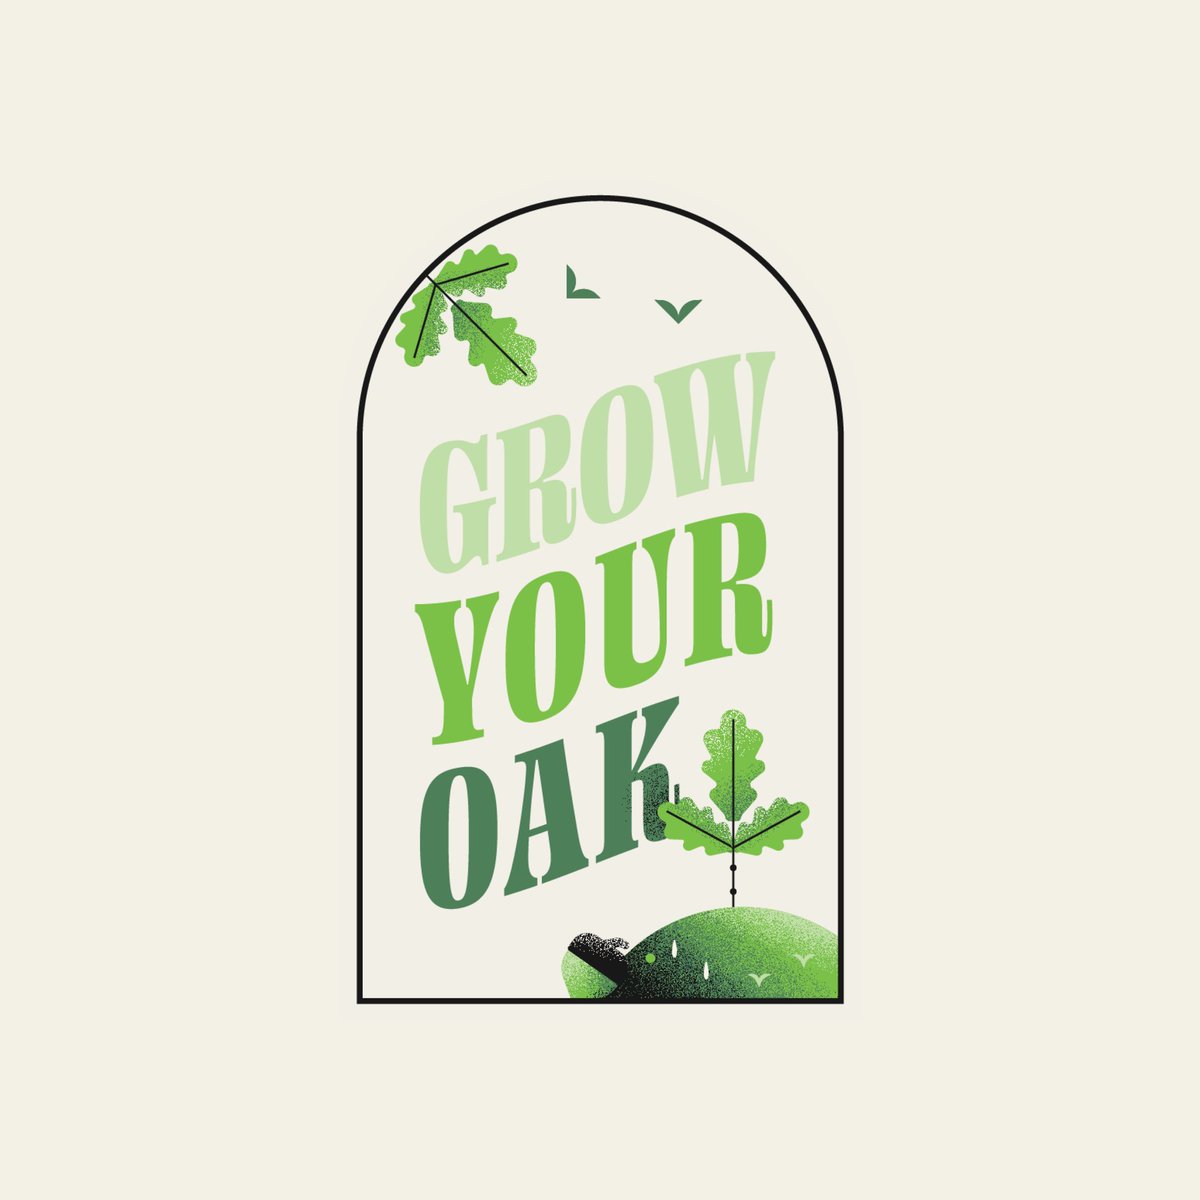 Here’s your friendly reminder to #growyouroak